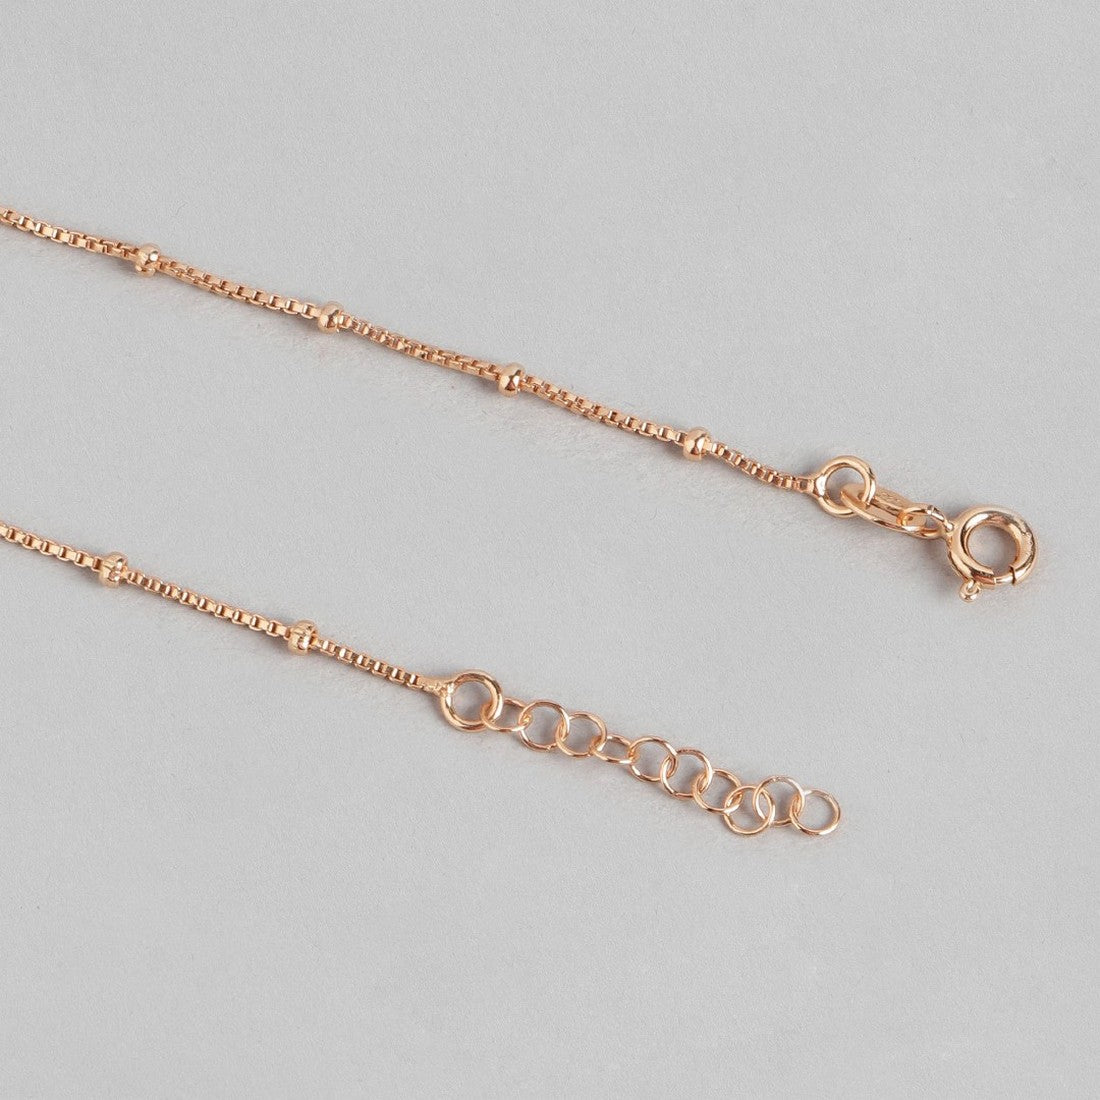 Dragonfly Rose Gold Plated 925 Sterling Silver Chain Anklet with Beads